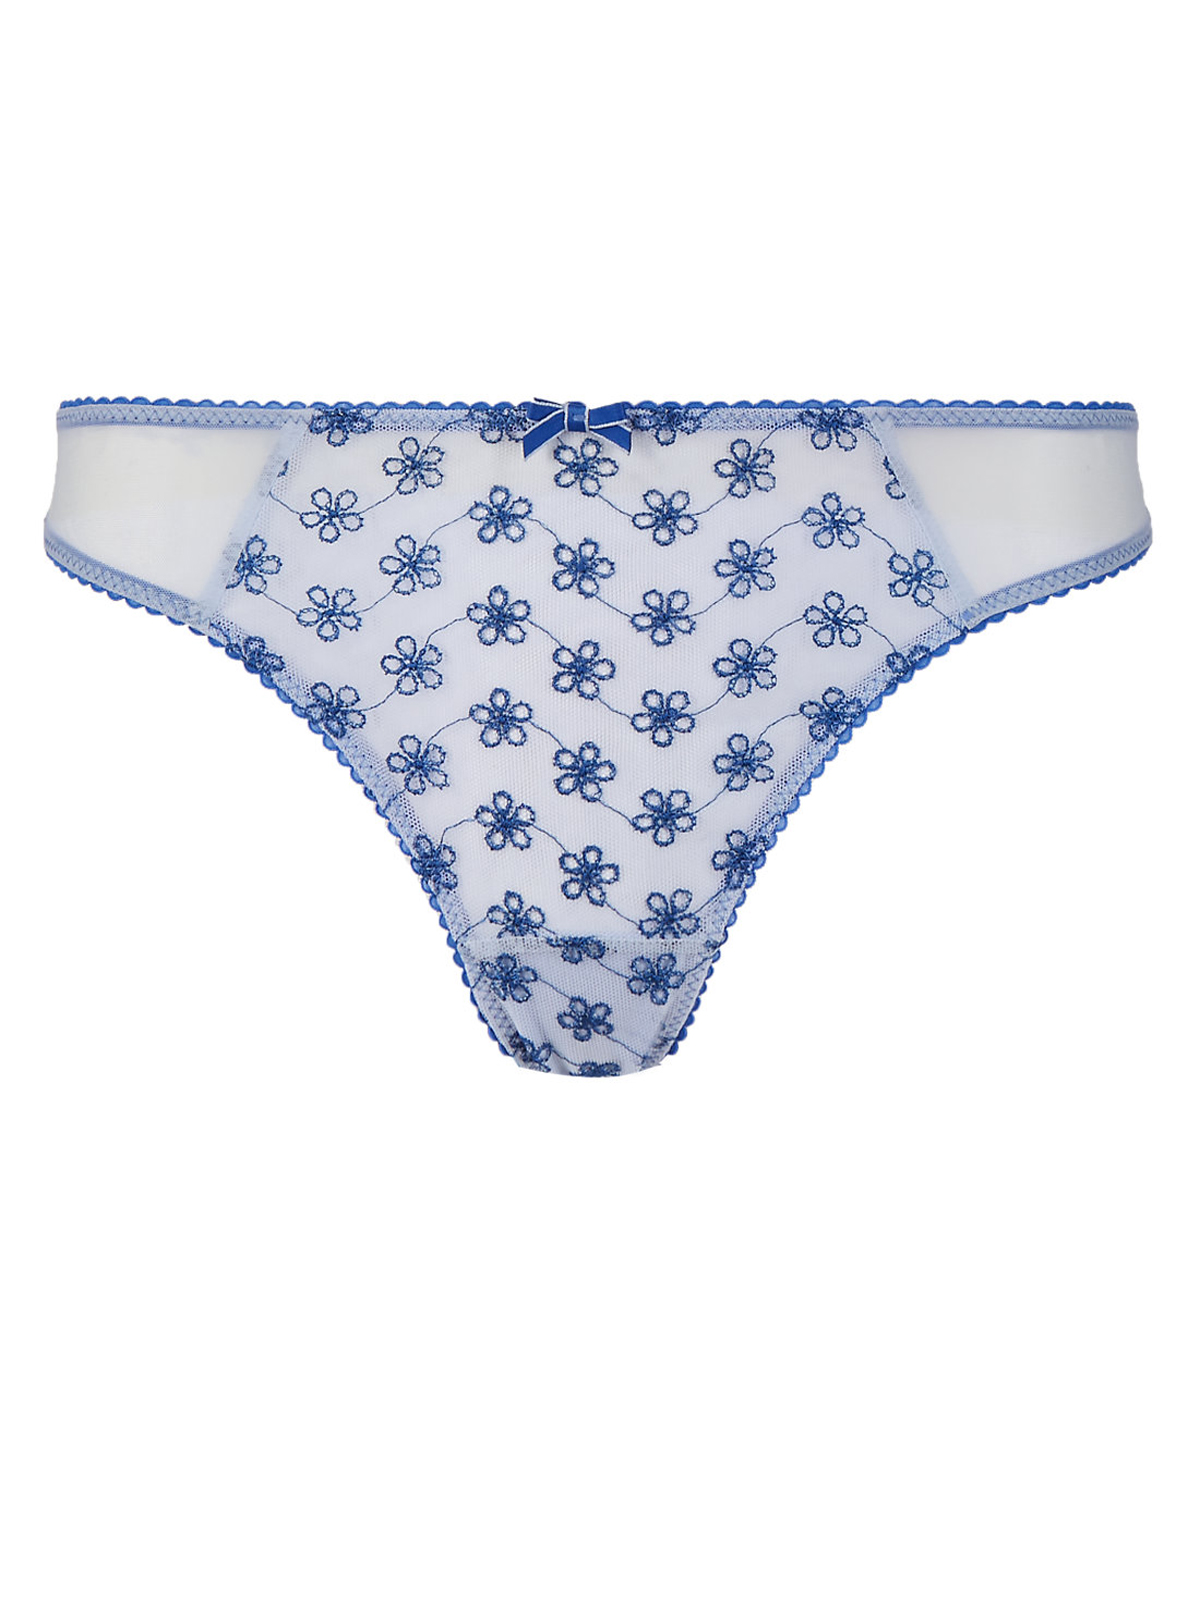 Marks and Spencer - - M&5 BLUE Broderie Angalise Panelled Thong - Size ...